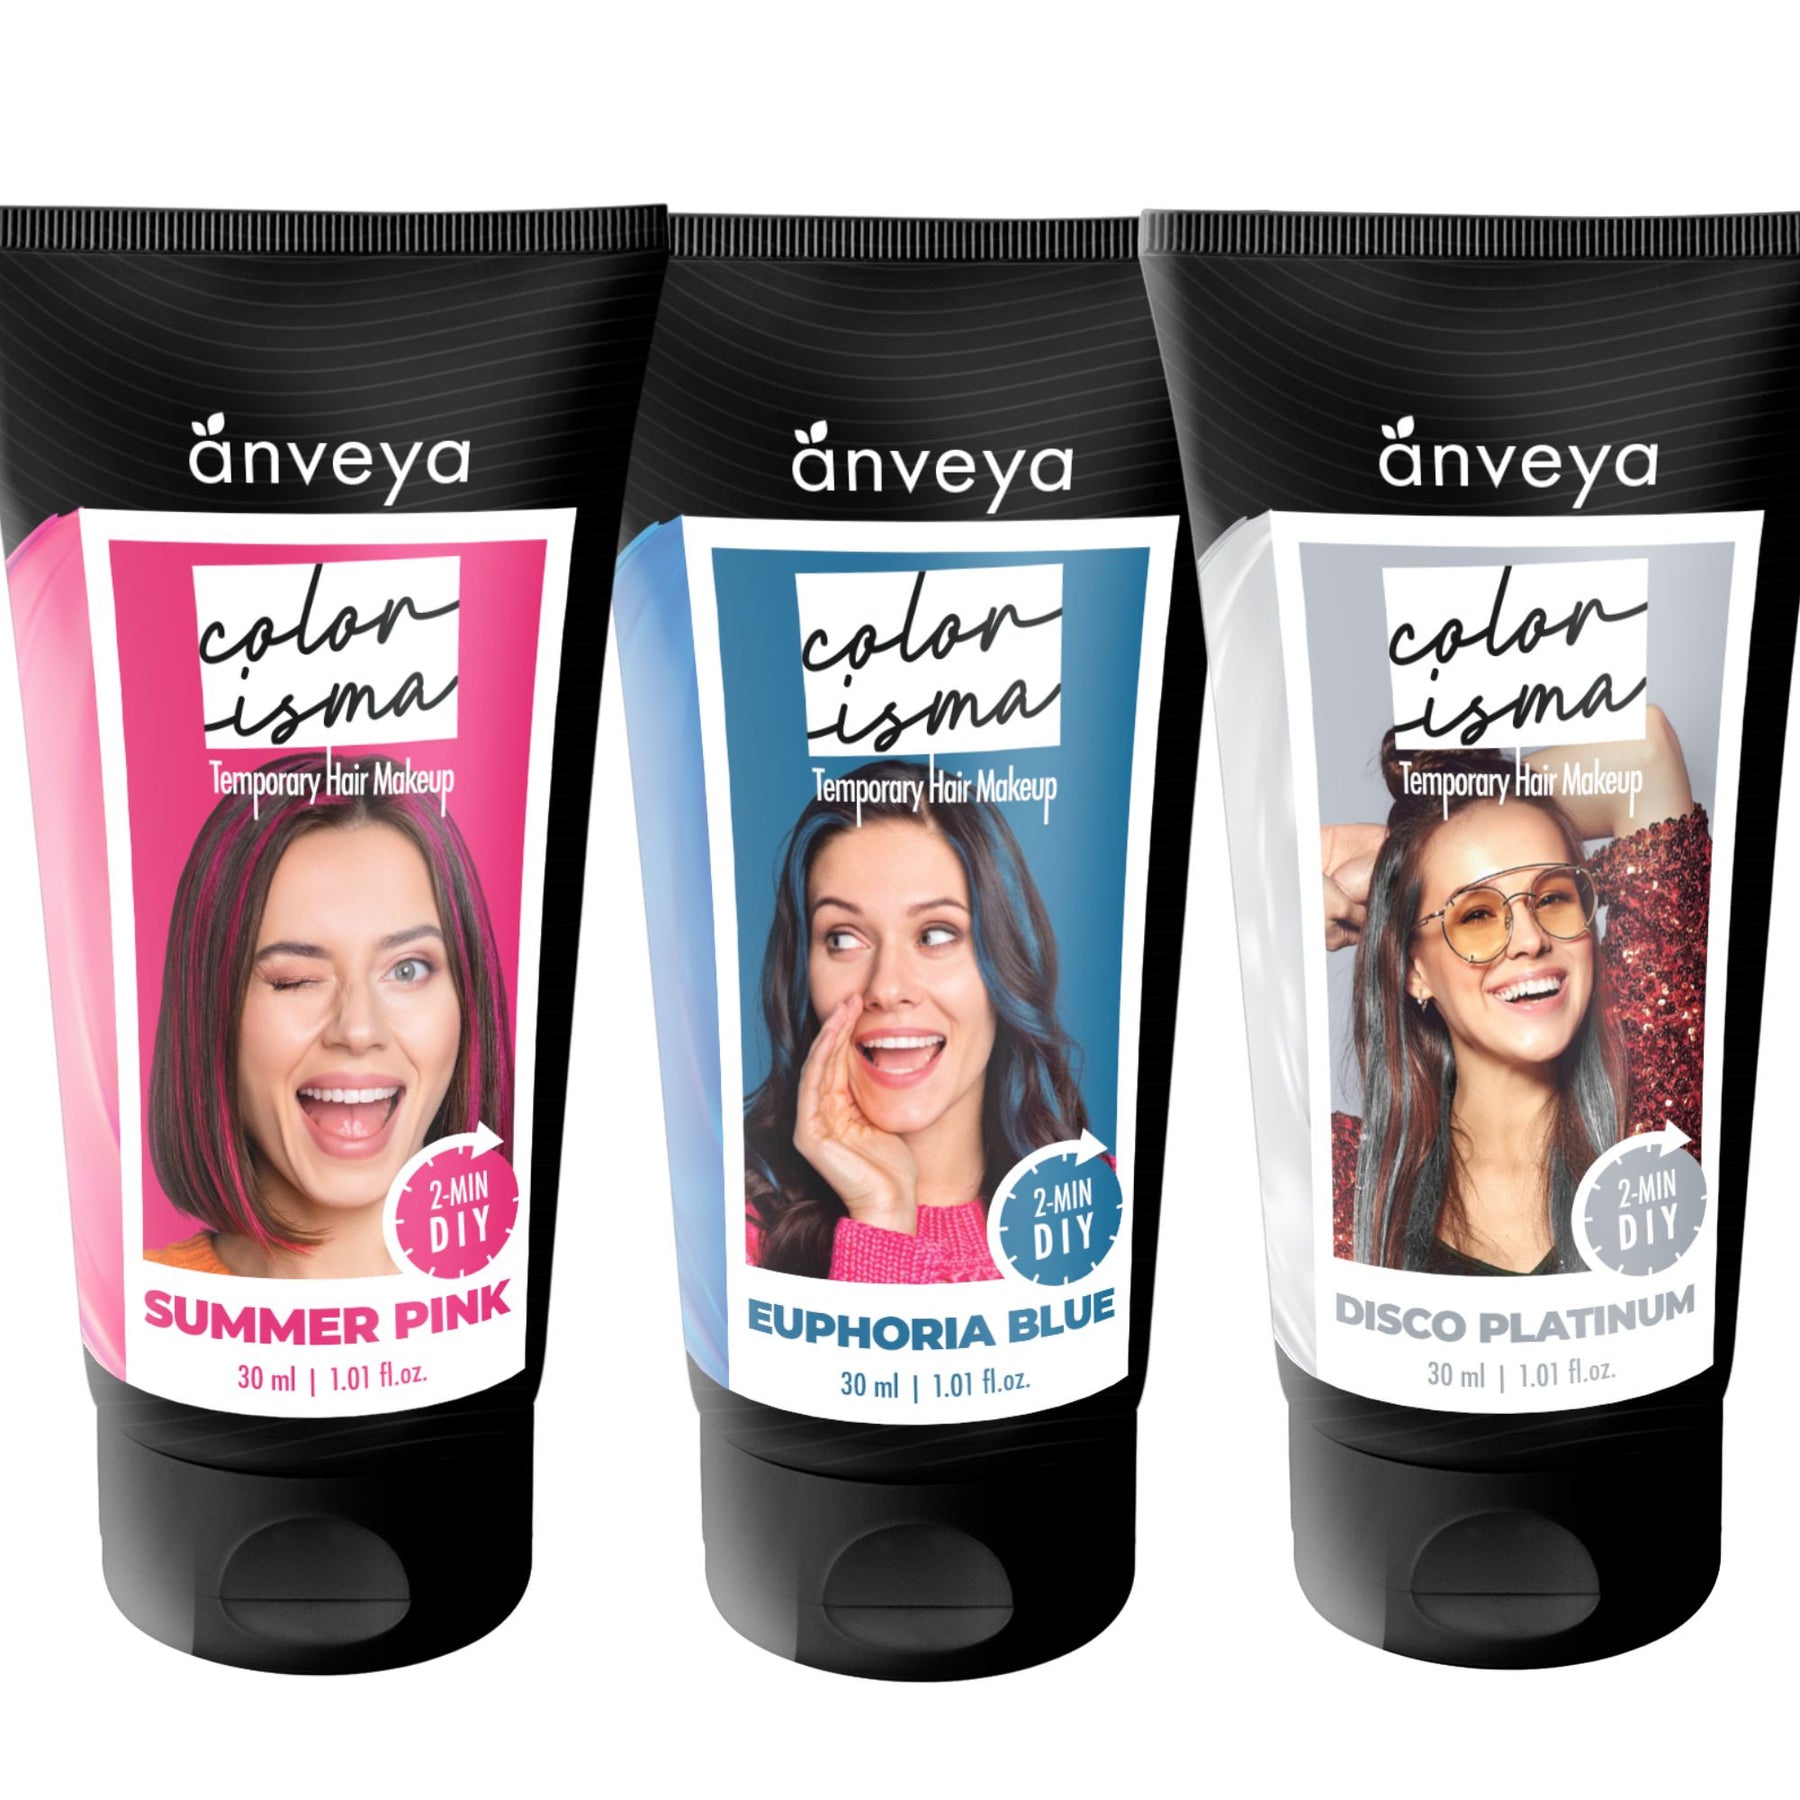 Try 'THE POPULAR Combos' of Anveya Colorisma Temporary 1-Wash Hair Color